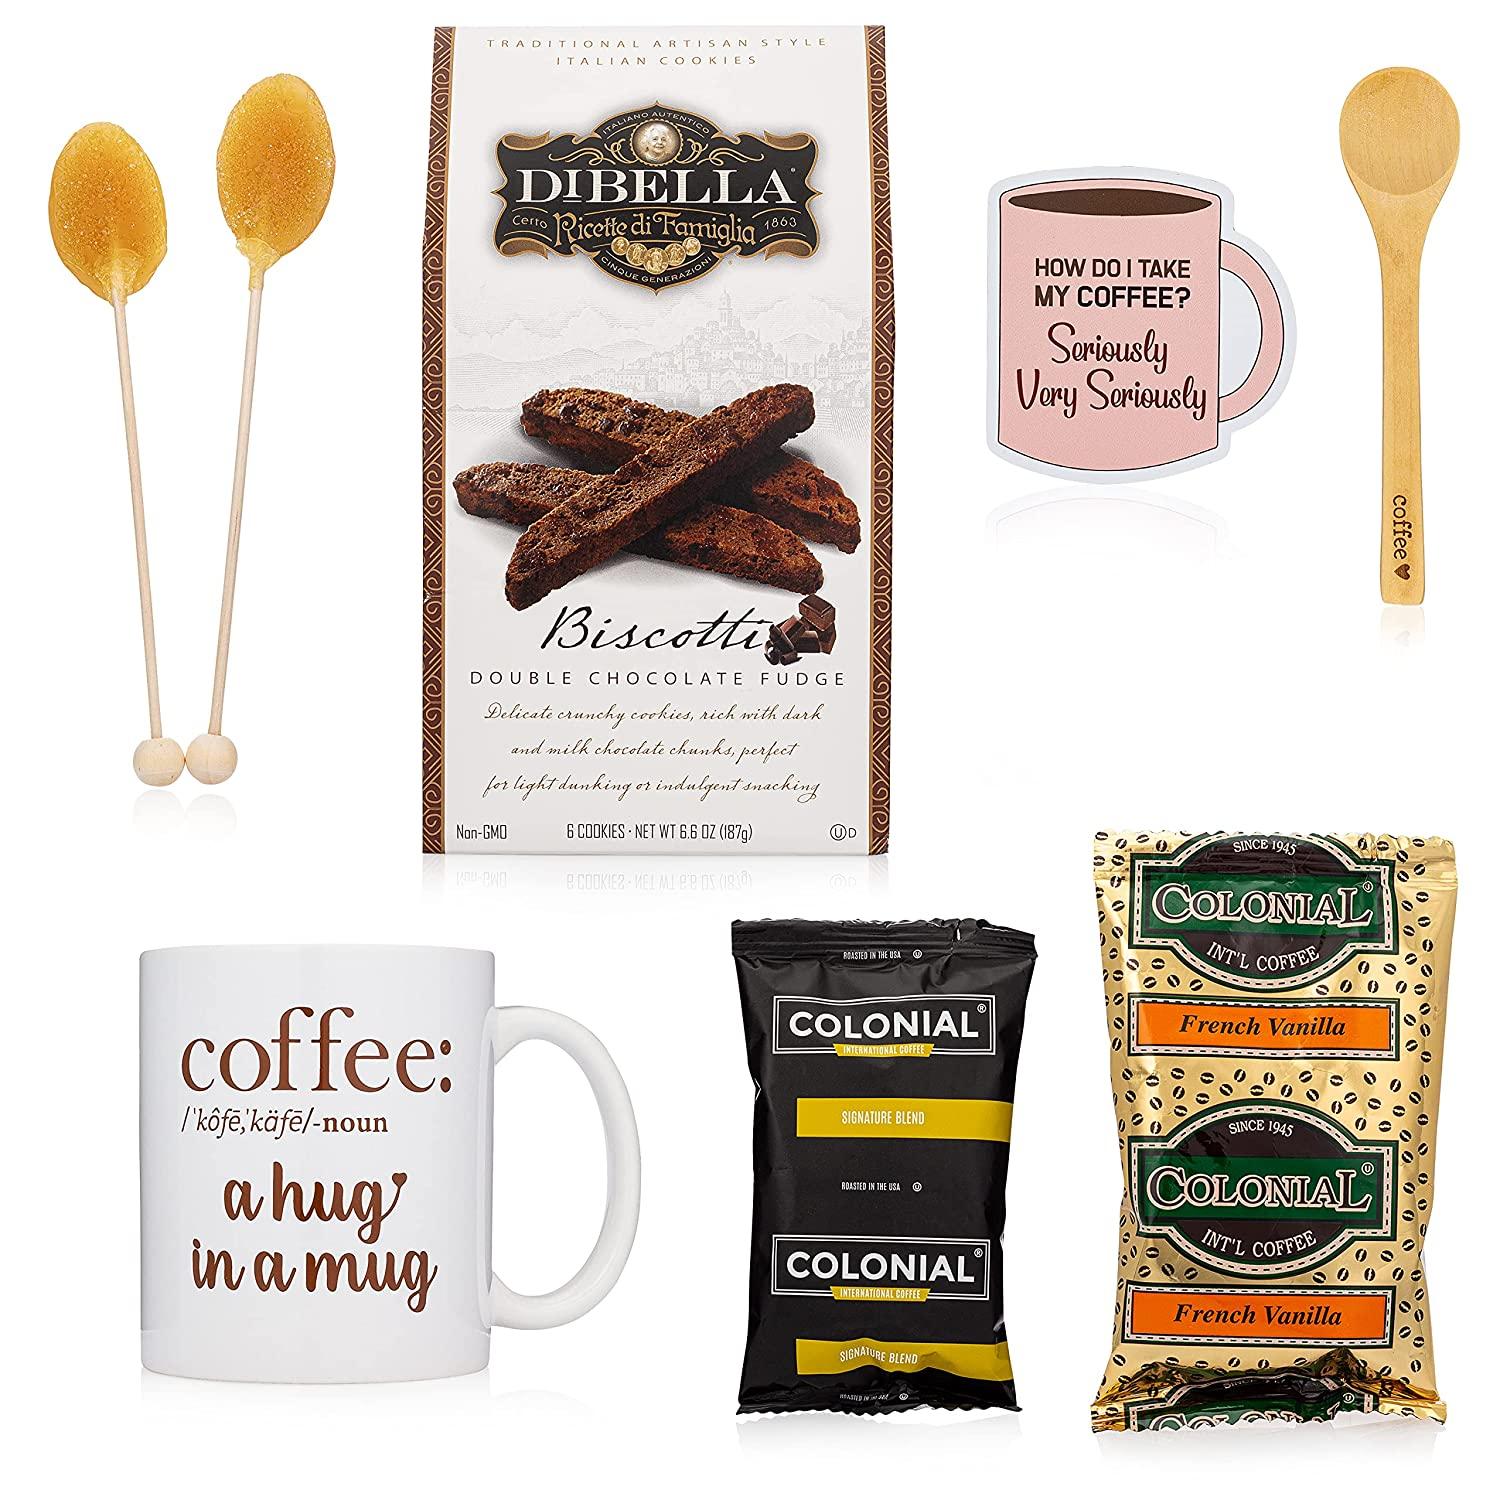 20 Gifts for Coffee Lovers ⋆ Sugar, Spice and Glitter